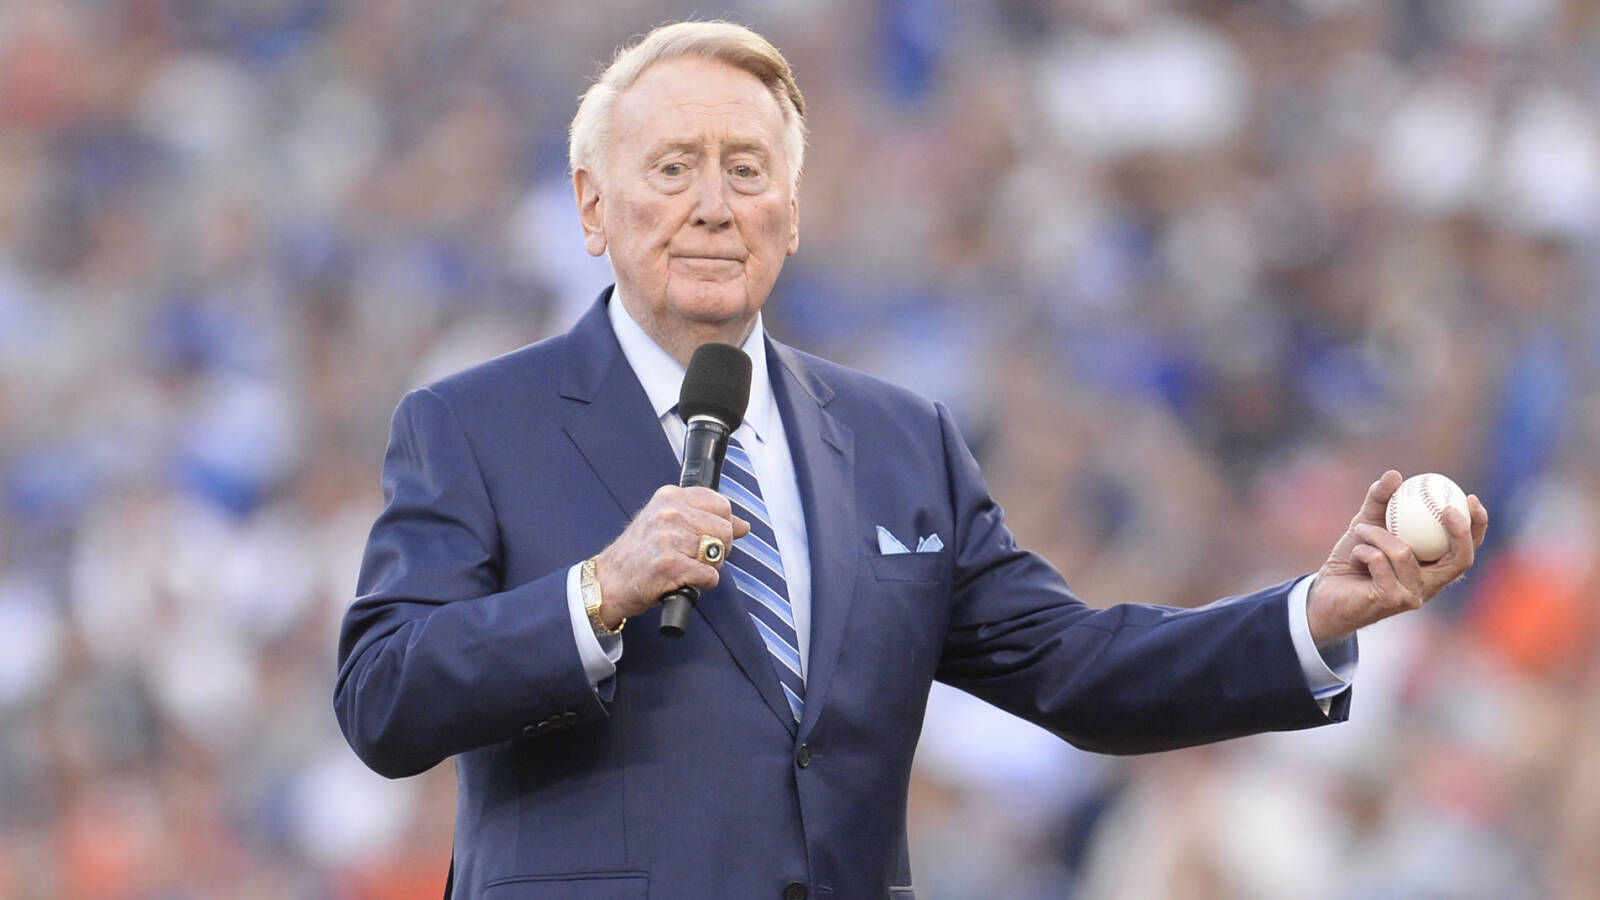 The best moments of Vin Scully's career